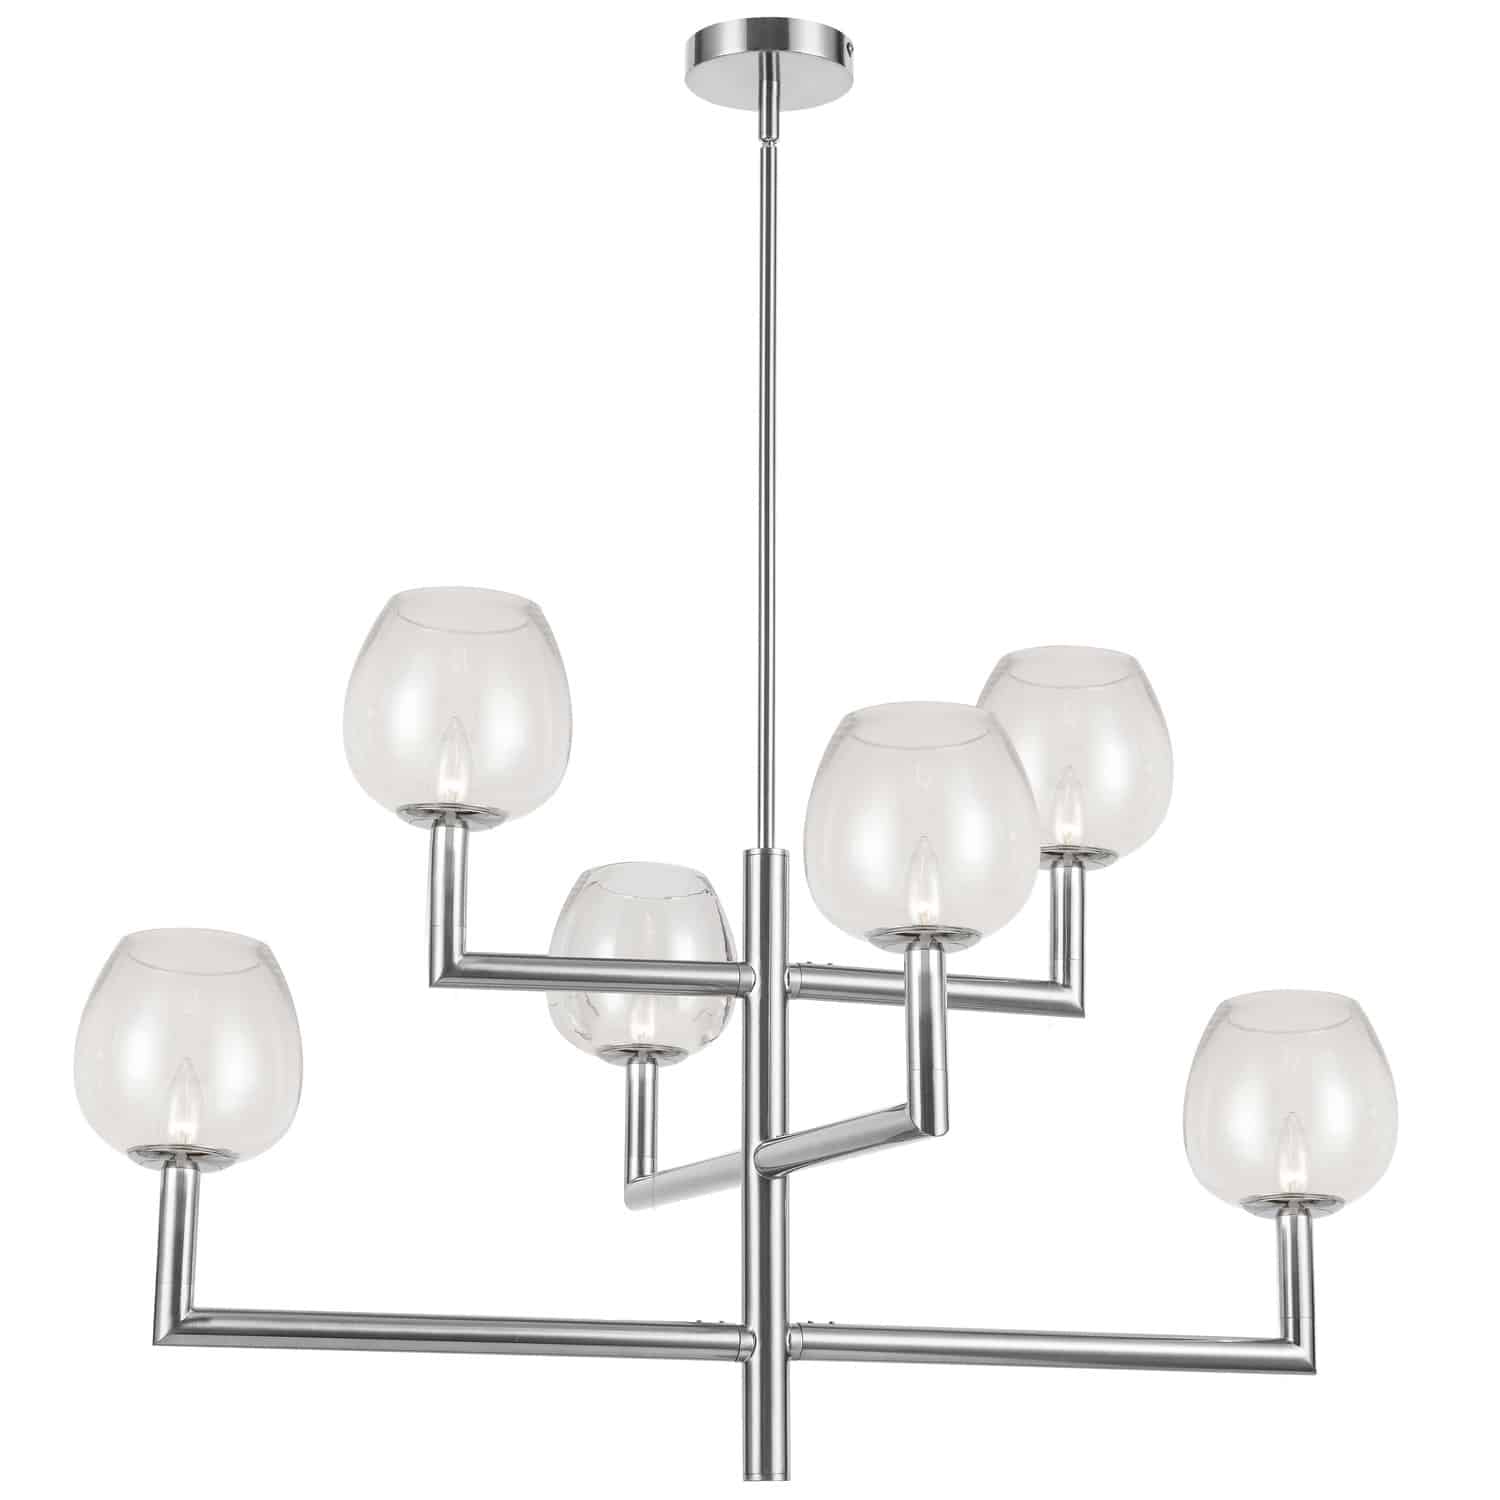 Nora 6-Light Polished Chrome Modern/Contemporary Damp Rated Chandelier | - Dainolite NOR-326C-PC-CLR